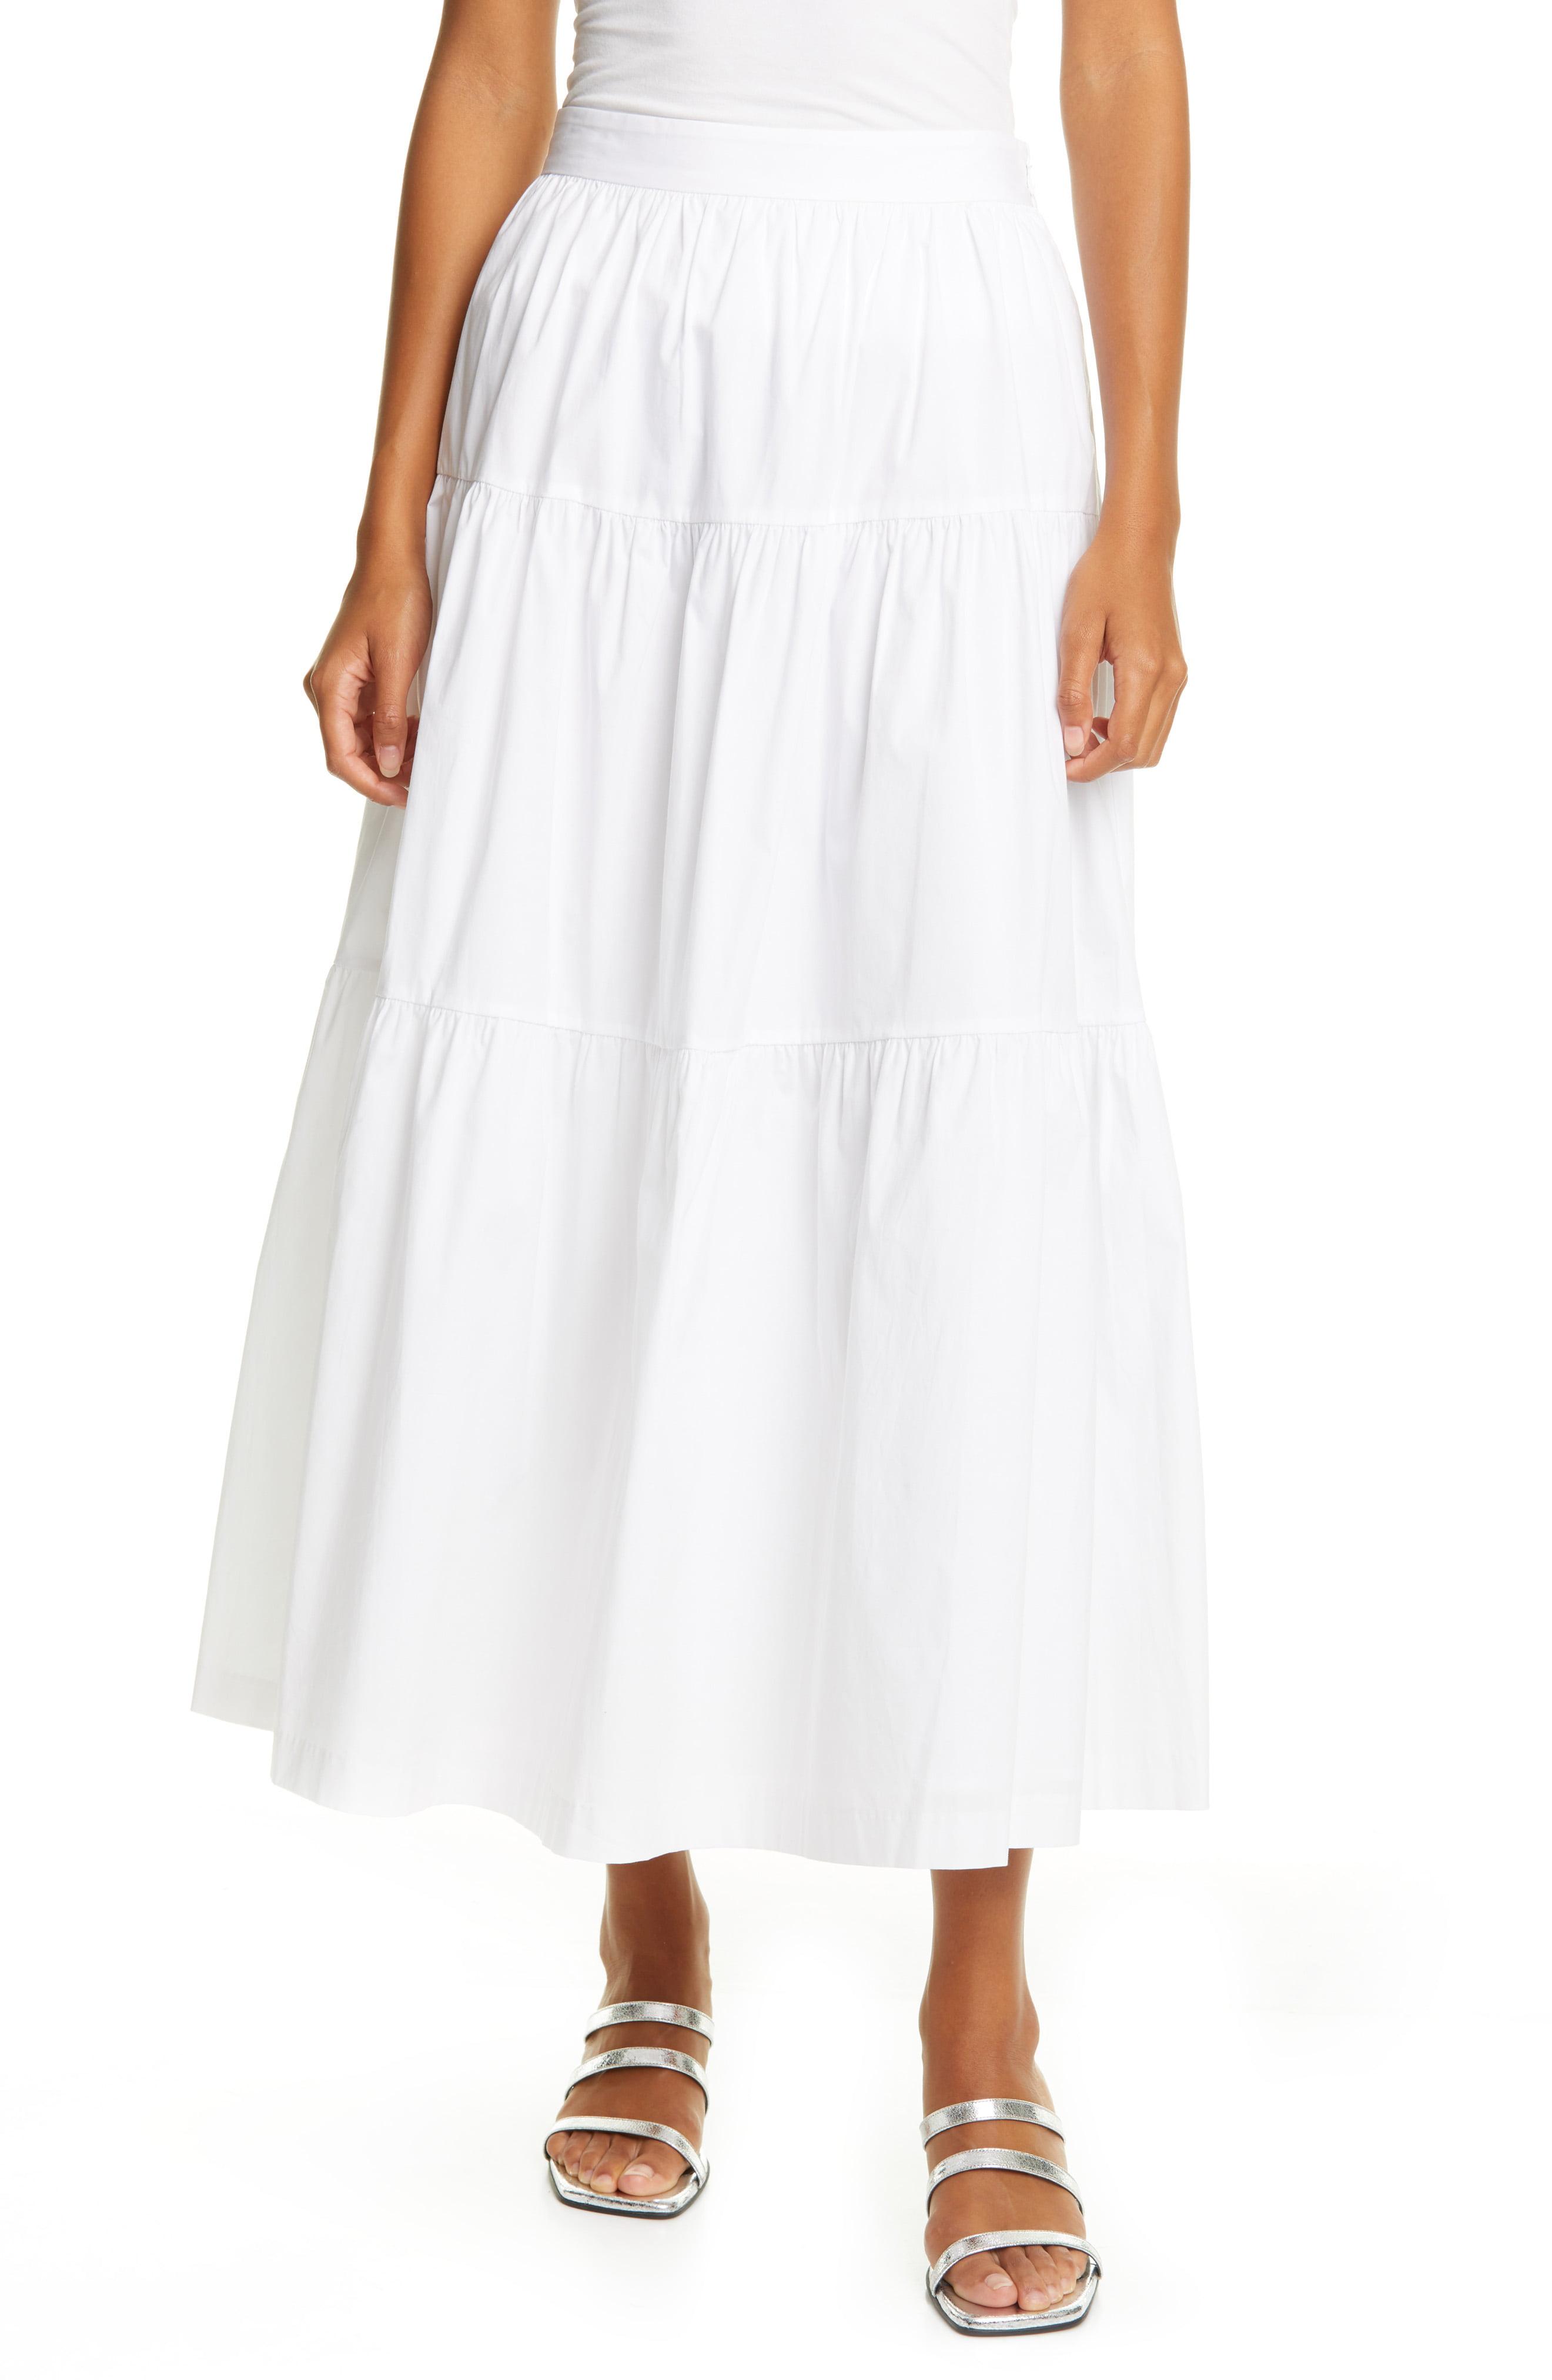 STAUD Tiered Stretch Cotton Maxi Skirt in White - Lyst